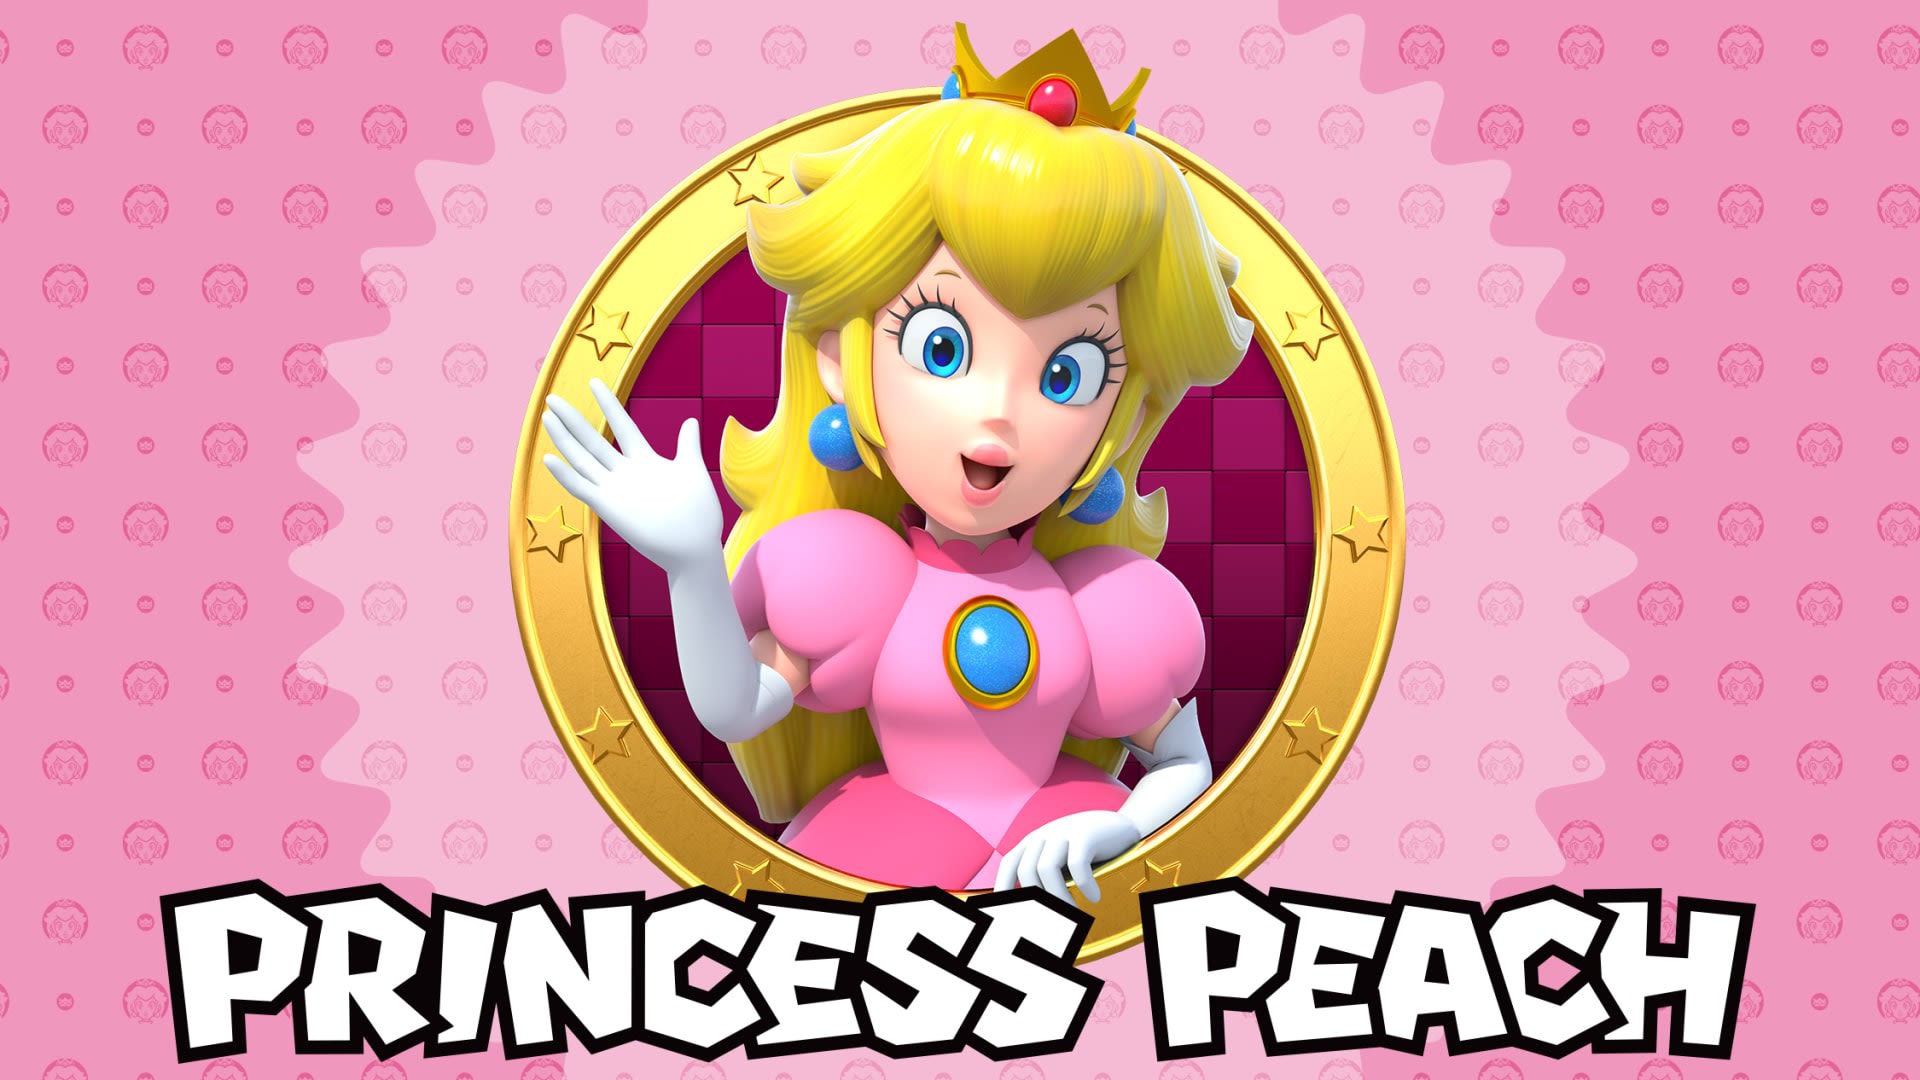 These games may have you shouting, “It's Peach time!” - Nintendo